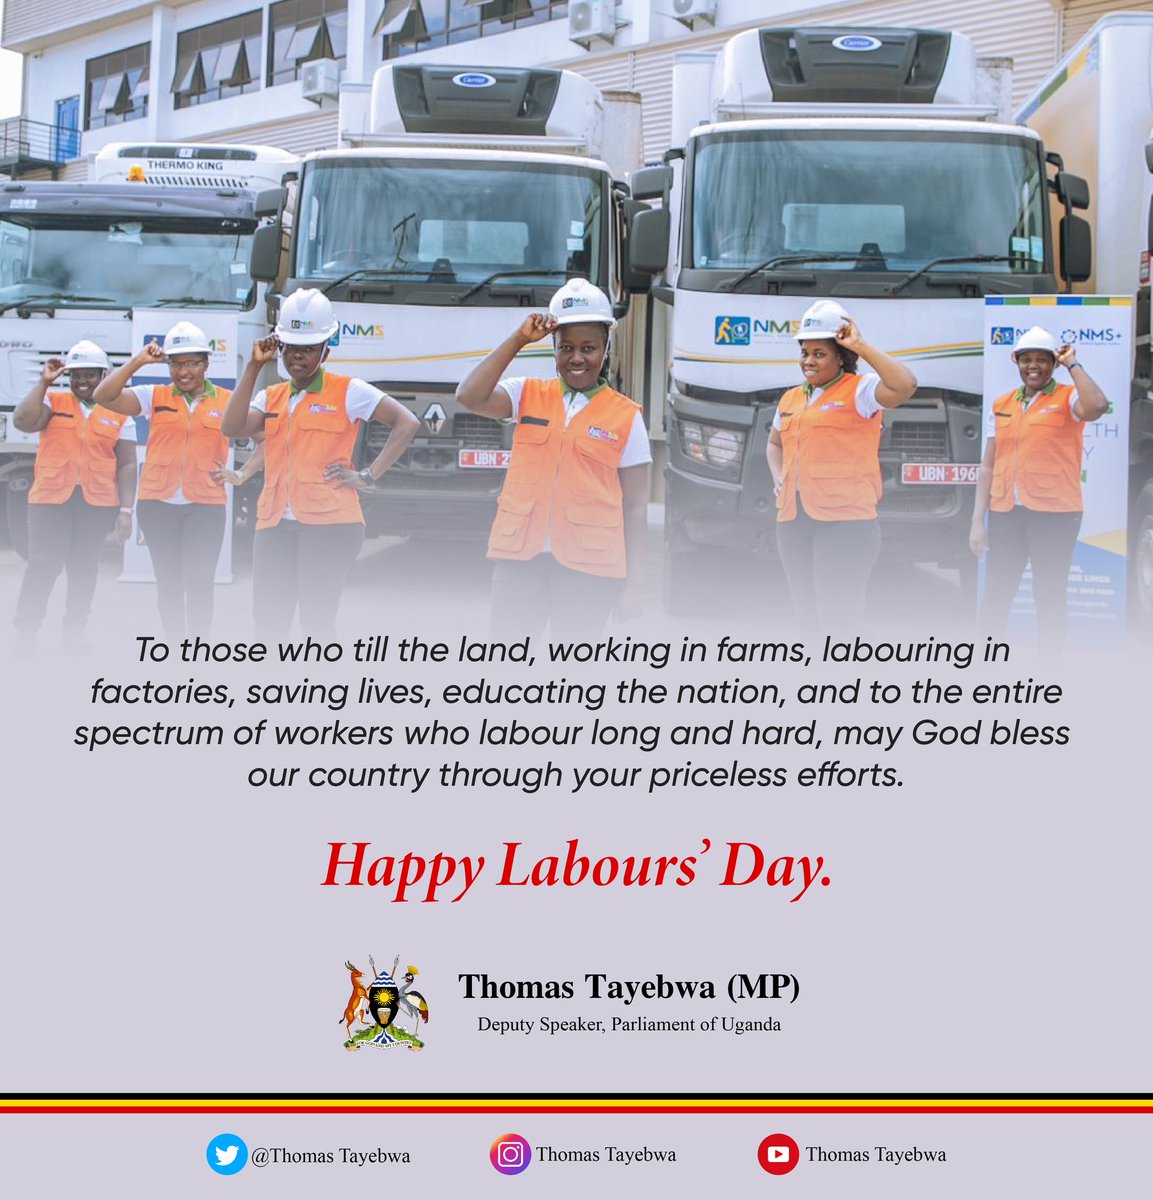 Happy Labours' Day!